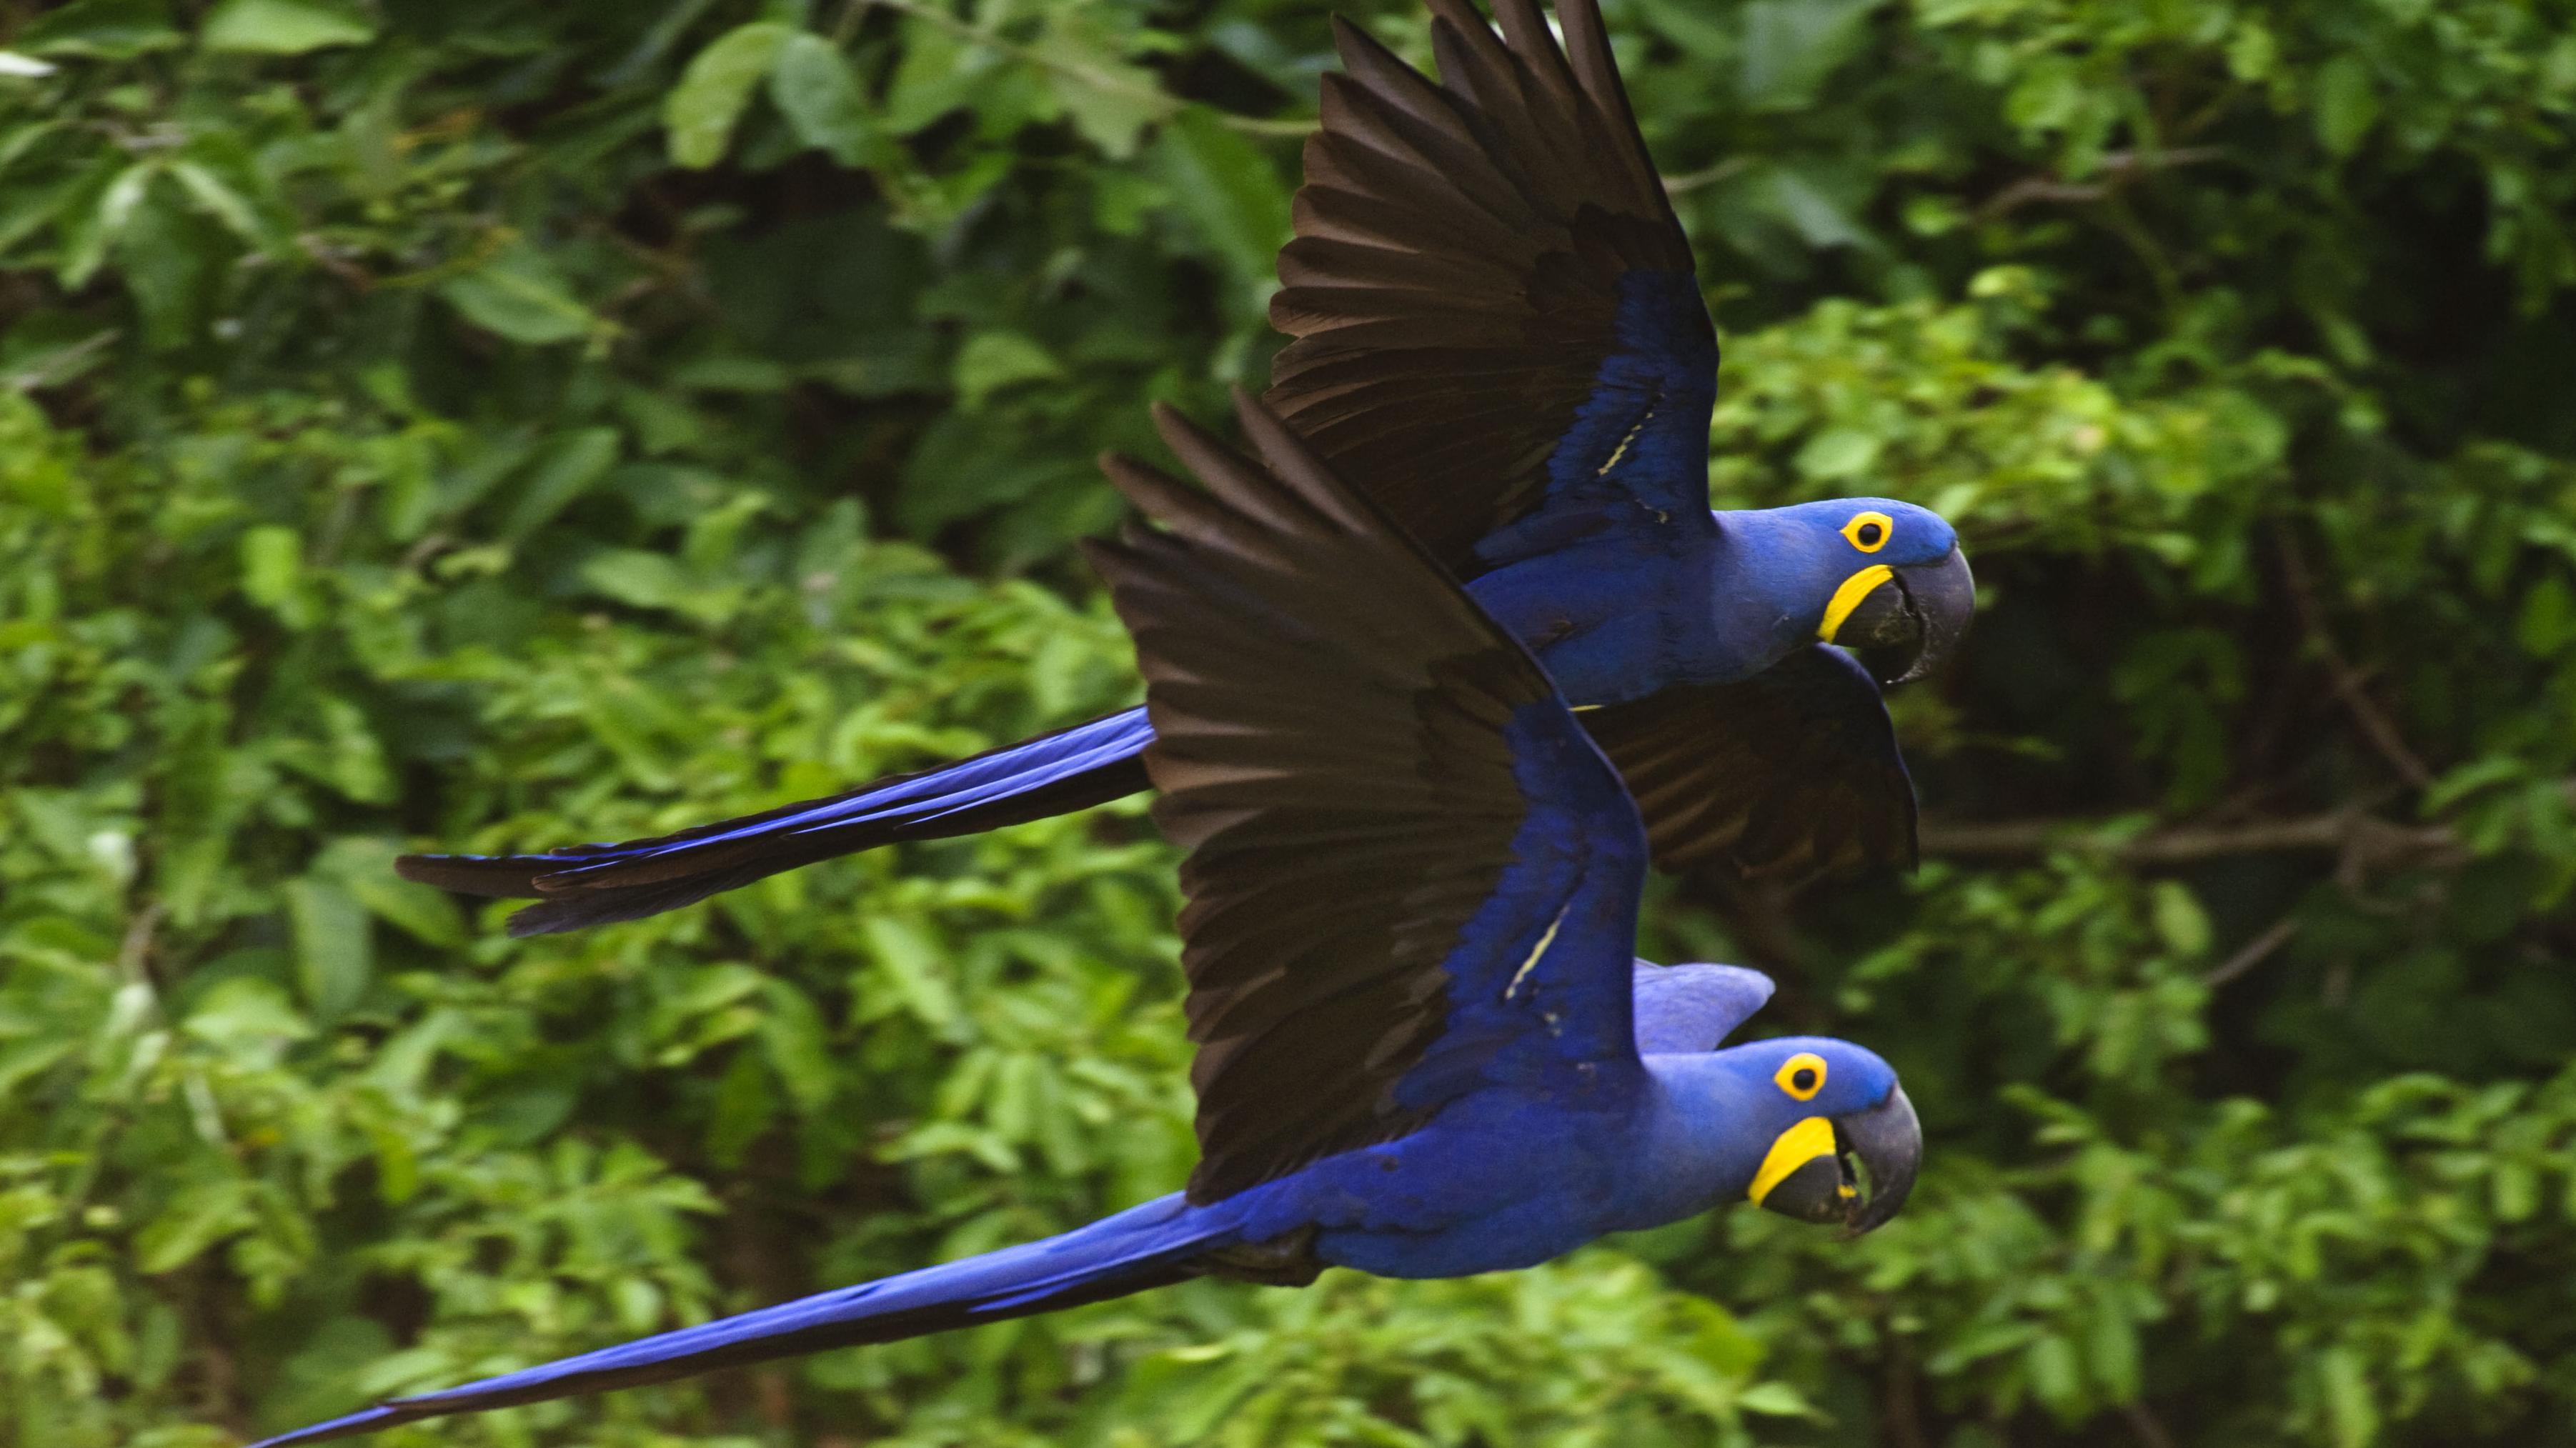 With support from Toyota since 1989, the Hyacinth Macaw Institute assists the protection and monitoring of a population of about 3,000 birds.